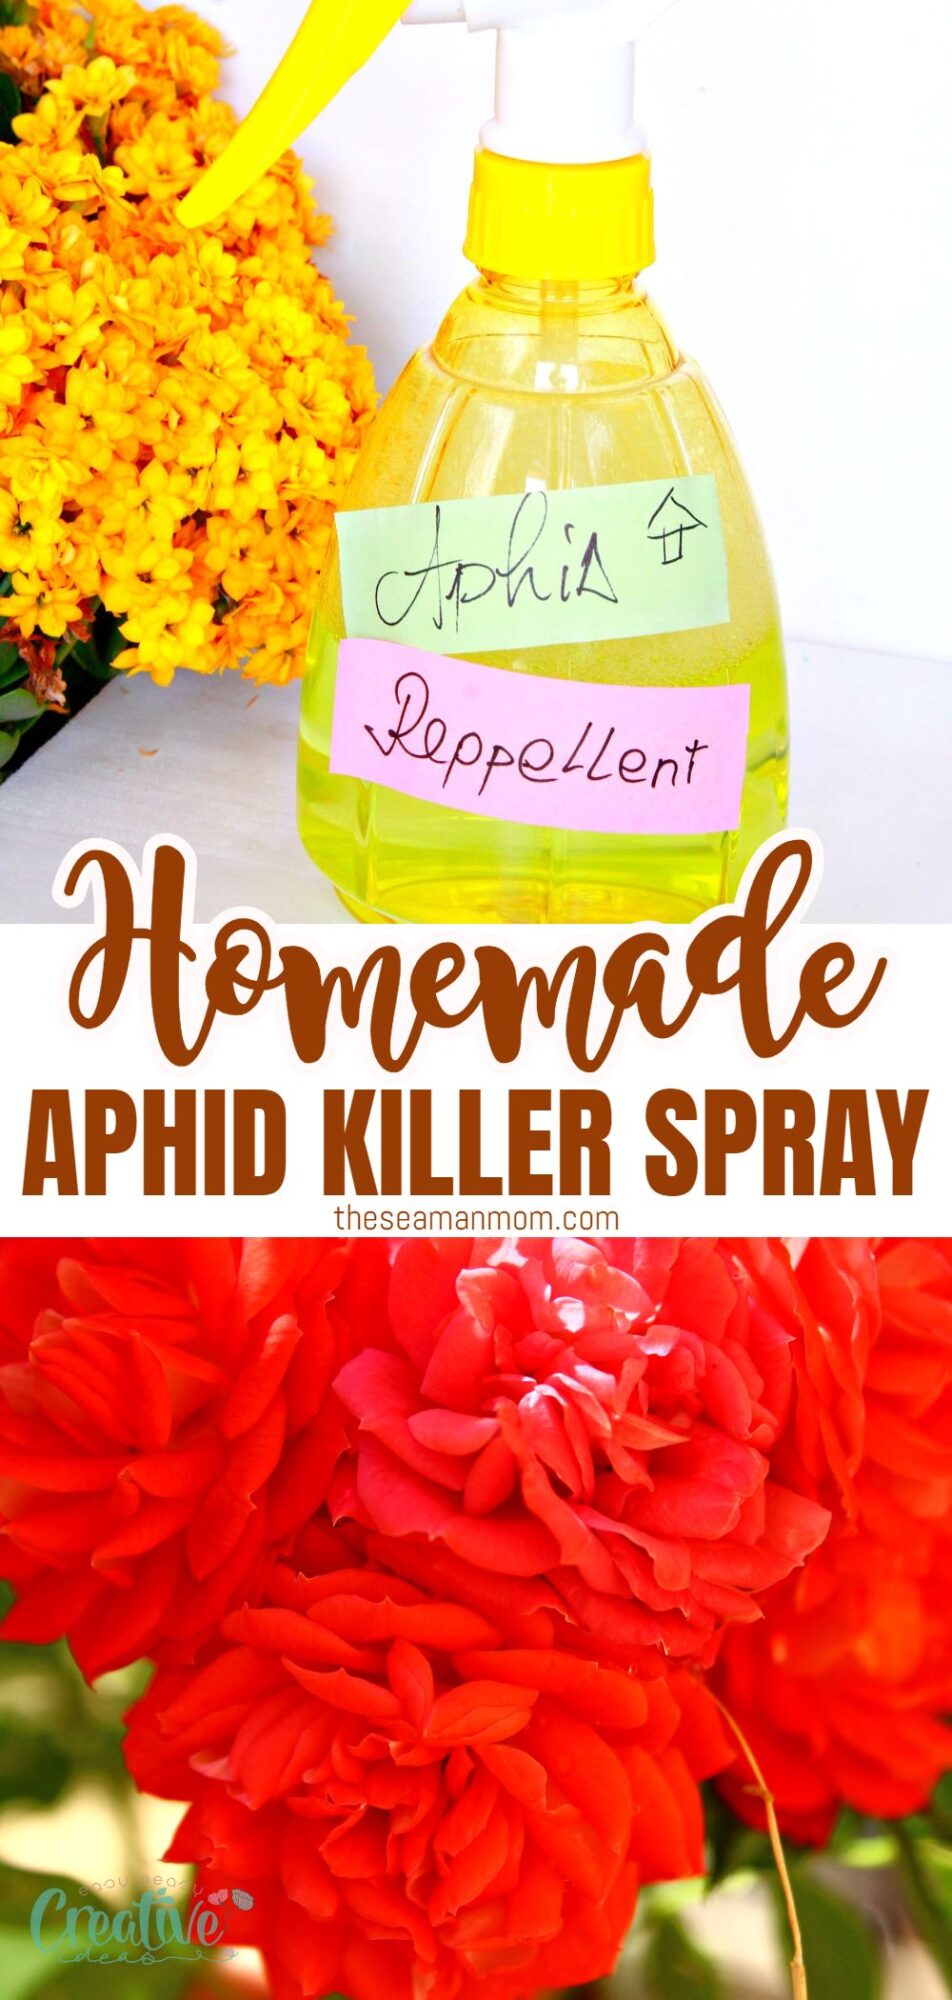 Organic aphid control: homemade aphid spray. A natural DIY solution to keep aphids away from your garden.